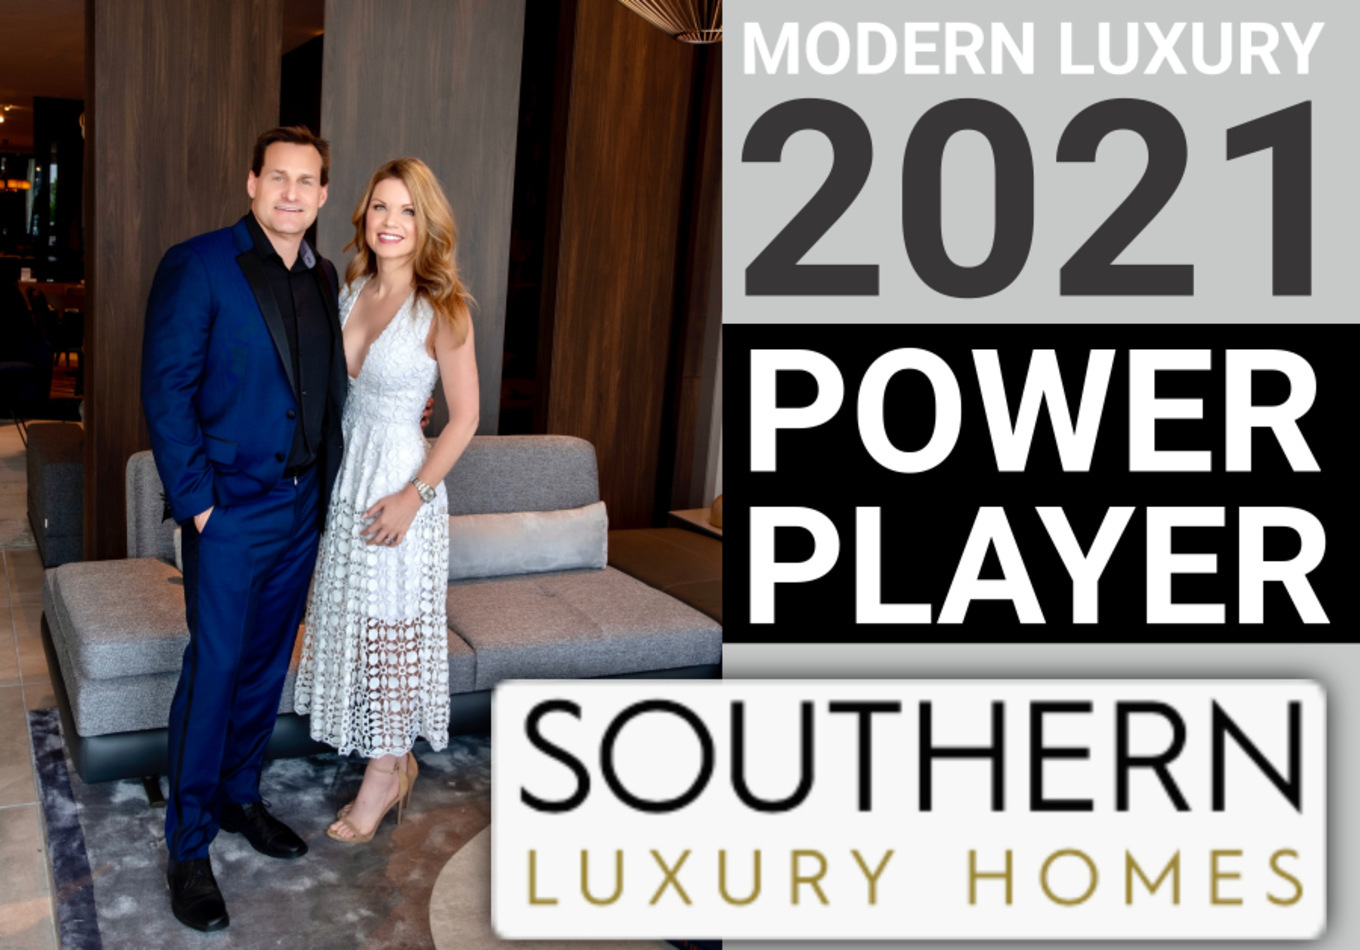 Southen Luxury Homes, Friday, July 9, 2021, Press release picture